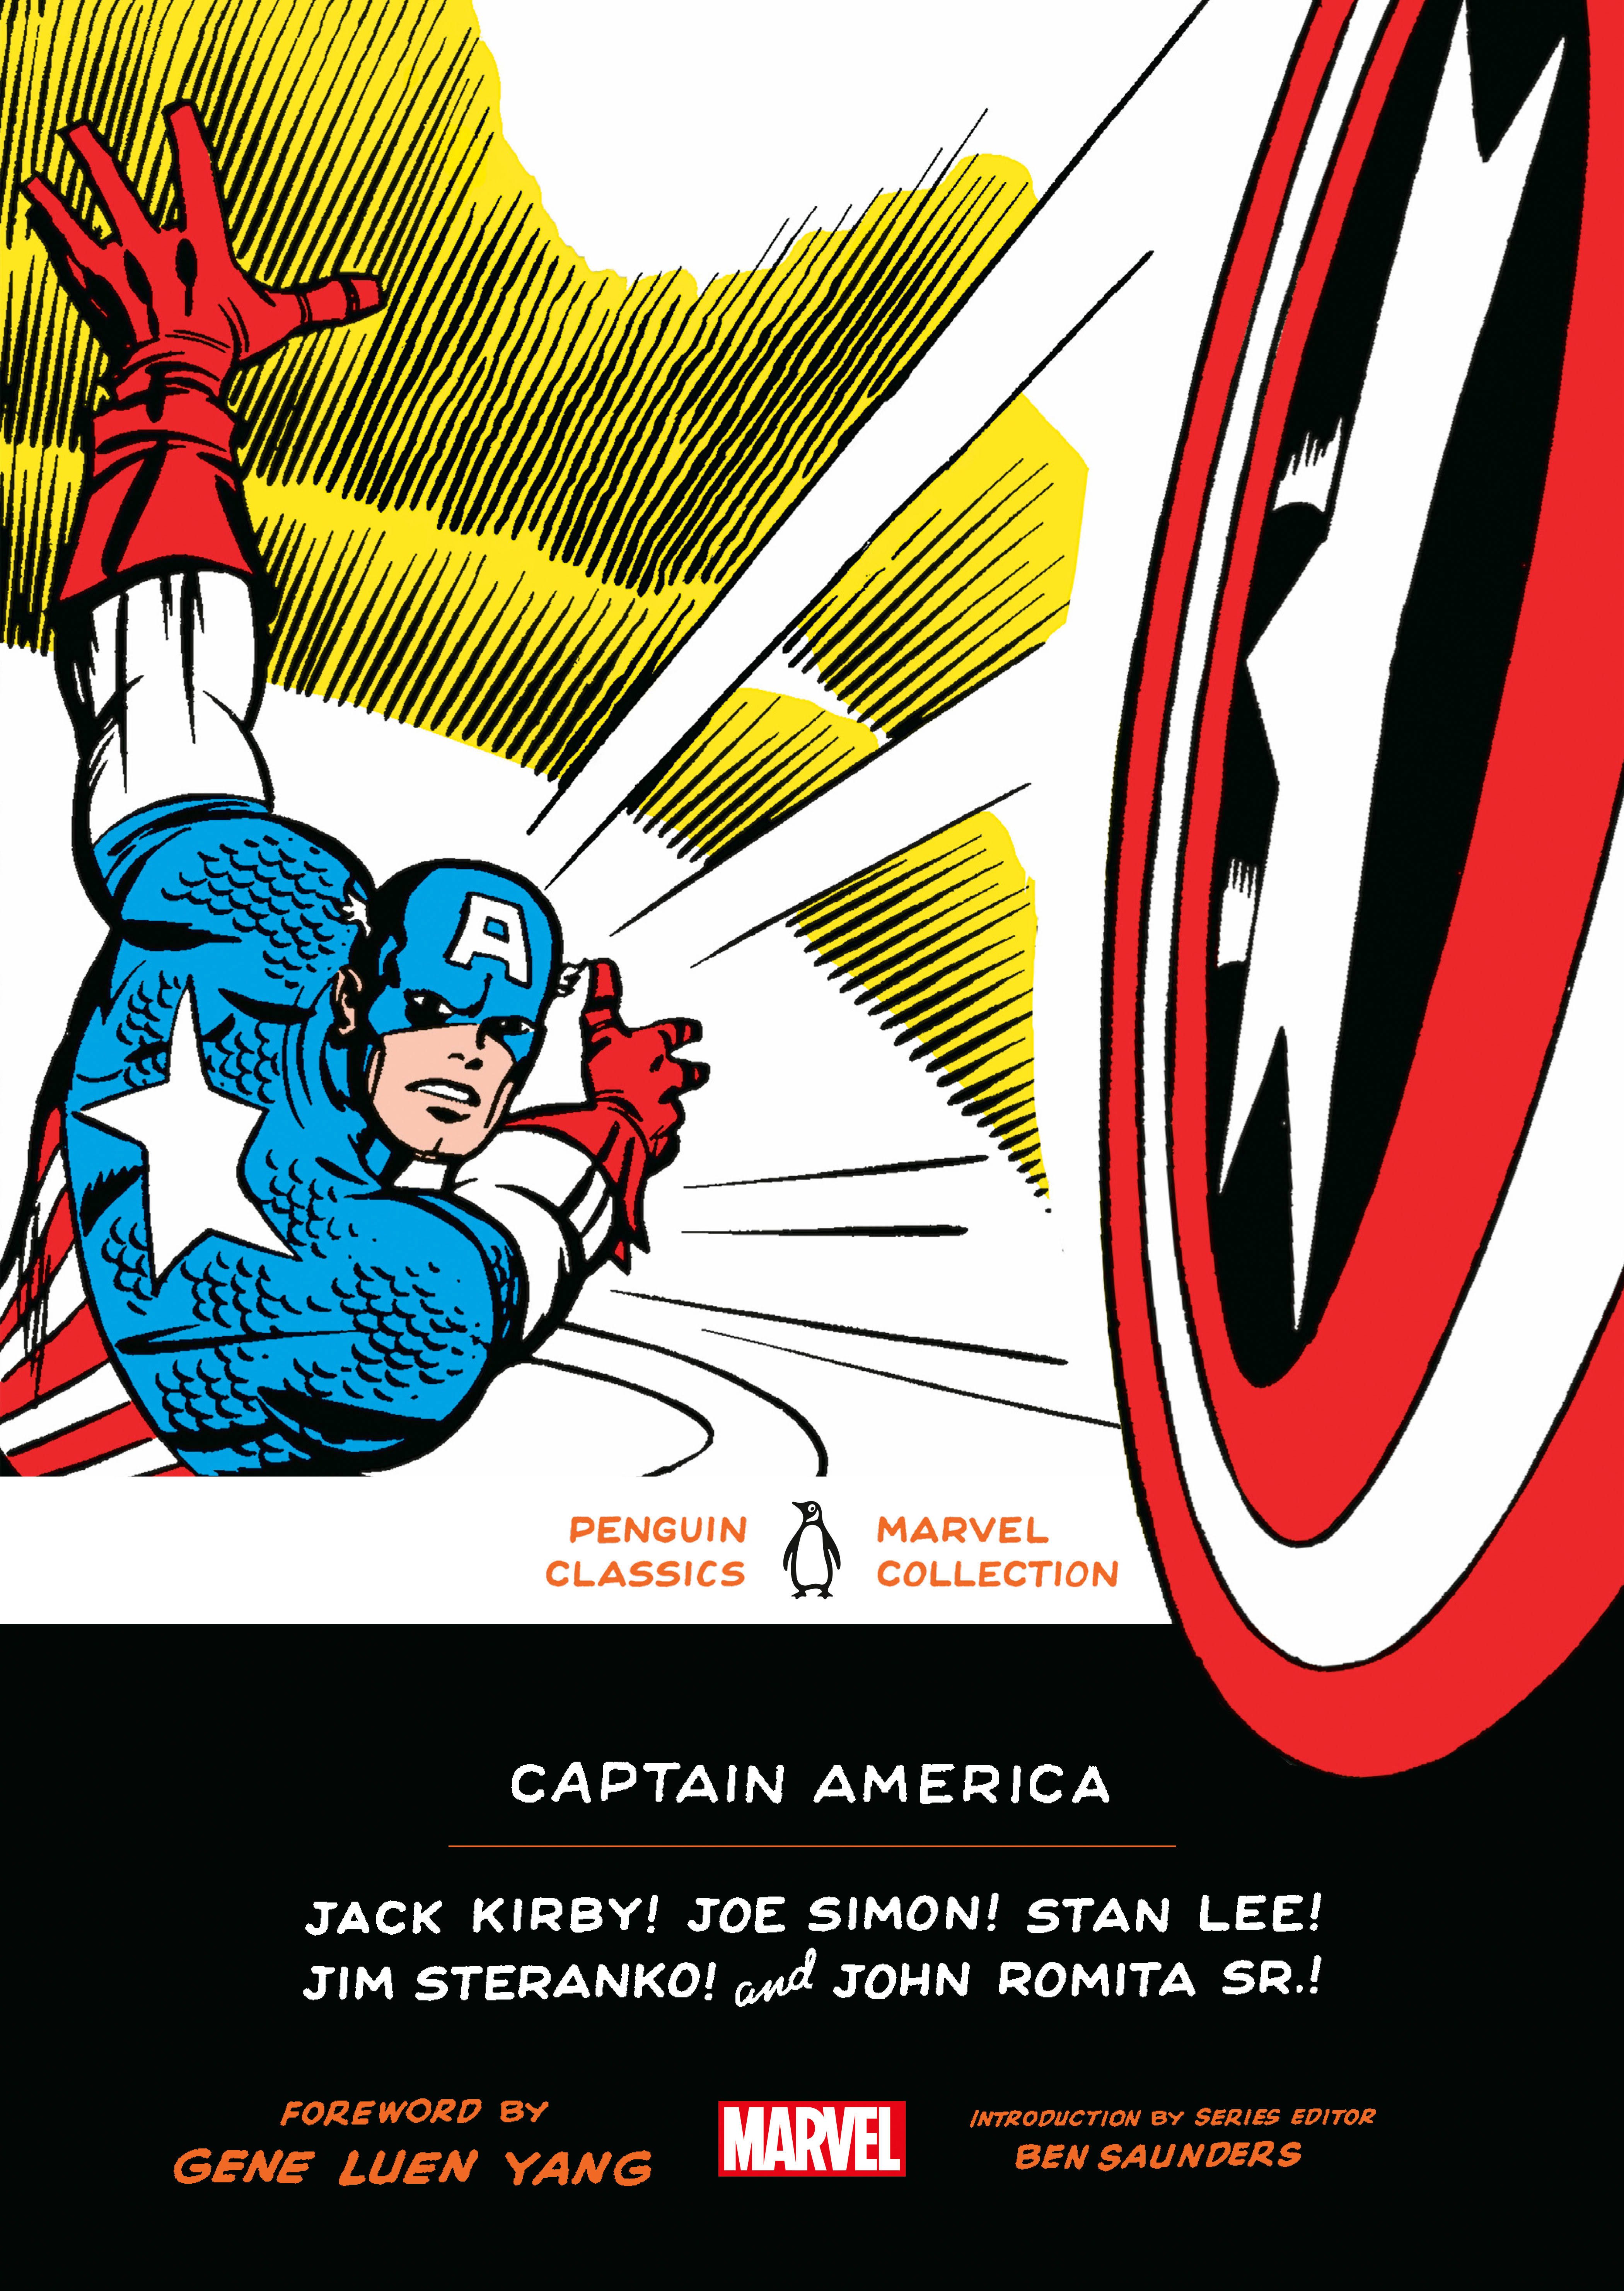 Captain America by Jack Kirby